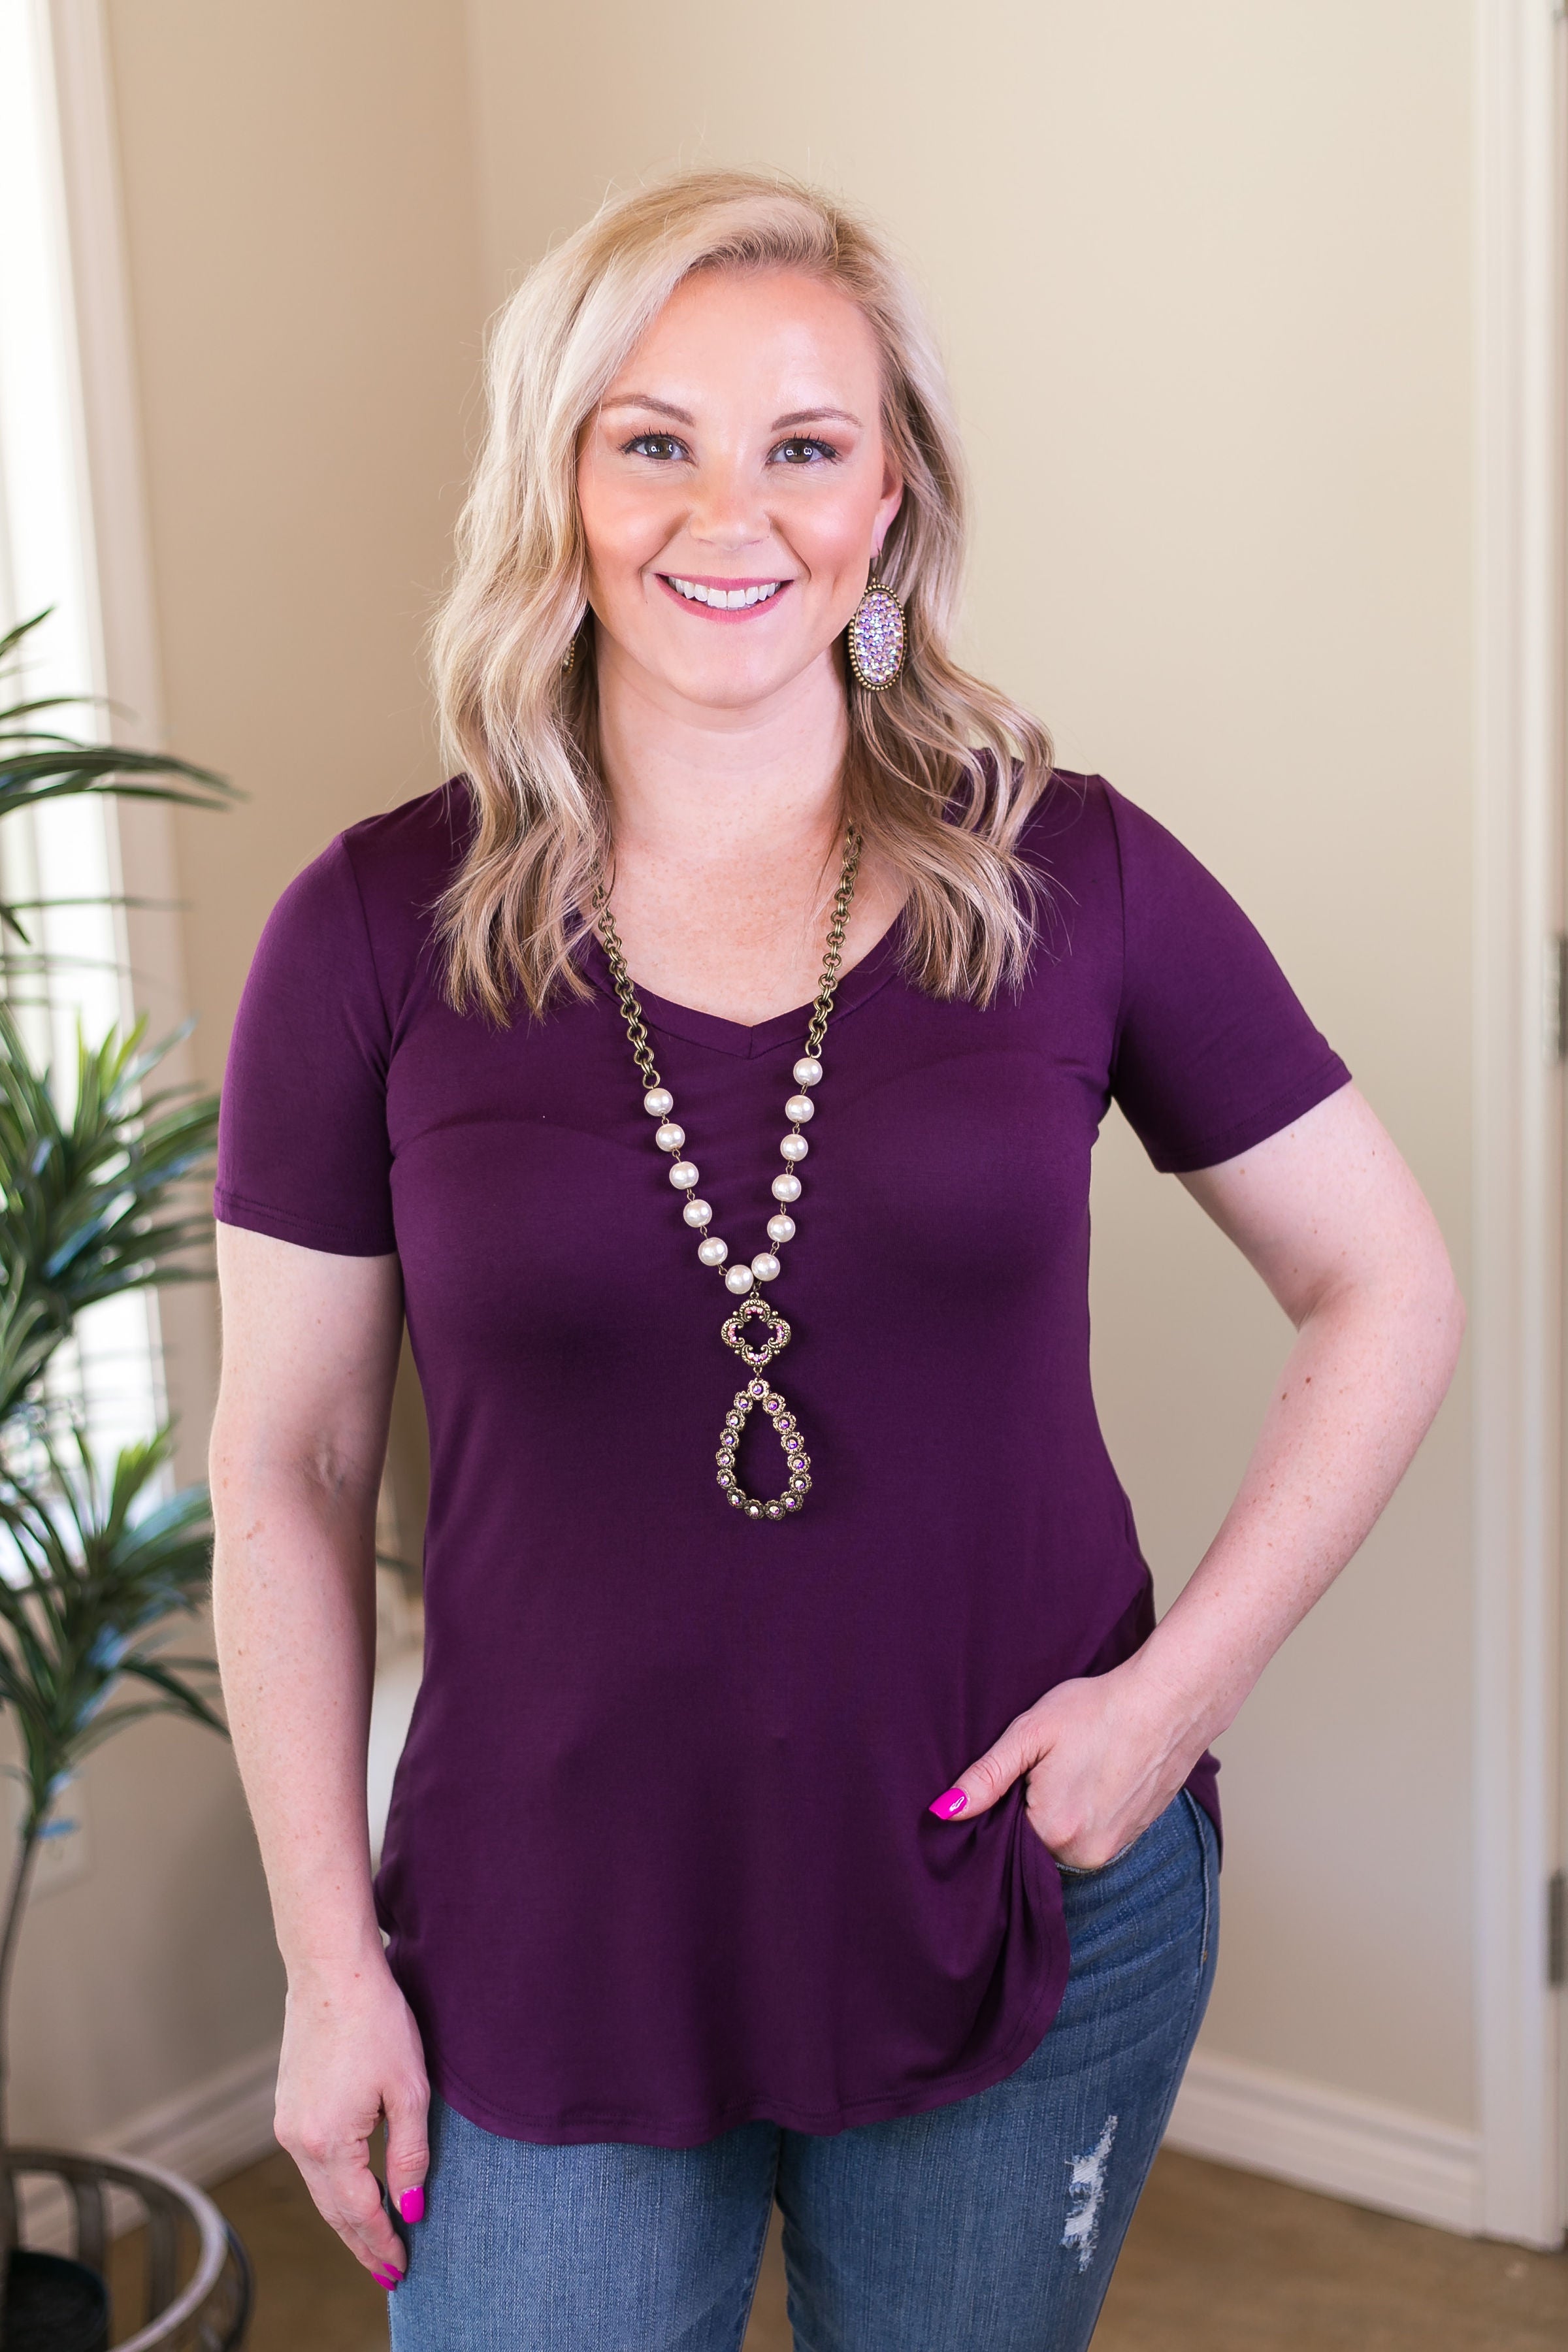 Simply The Best V Neck Short Sleeve Tee Shirt in Purple - Giddy Up Glamour Boutique